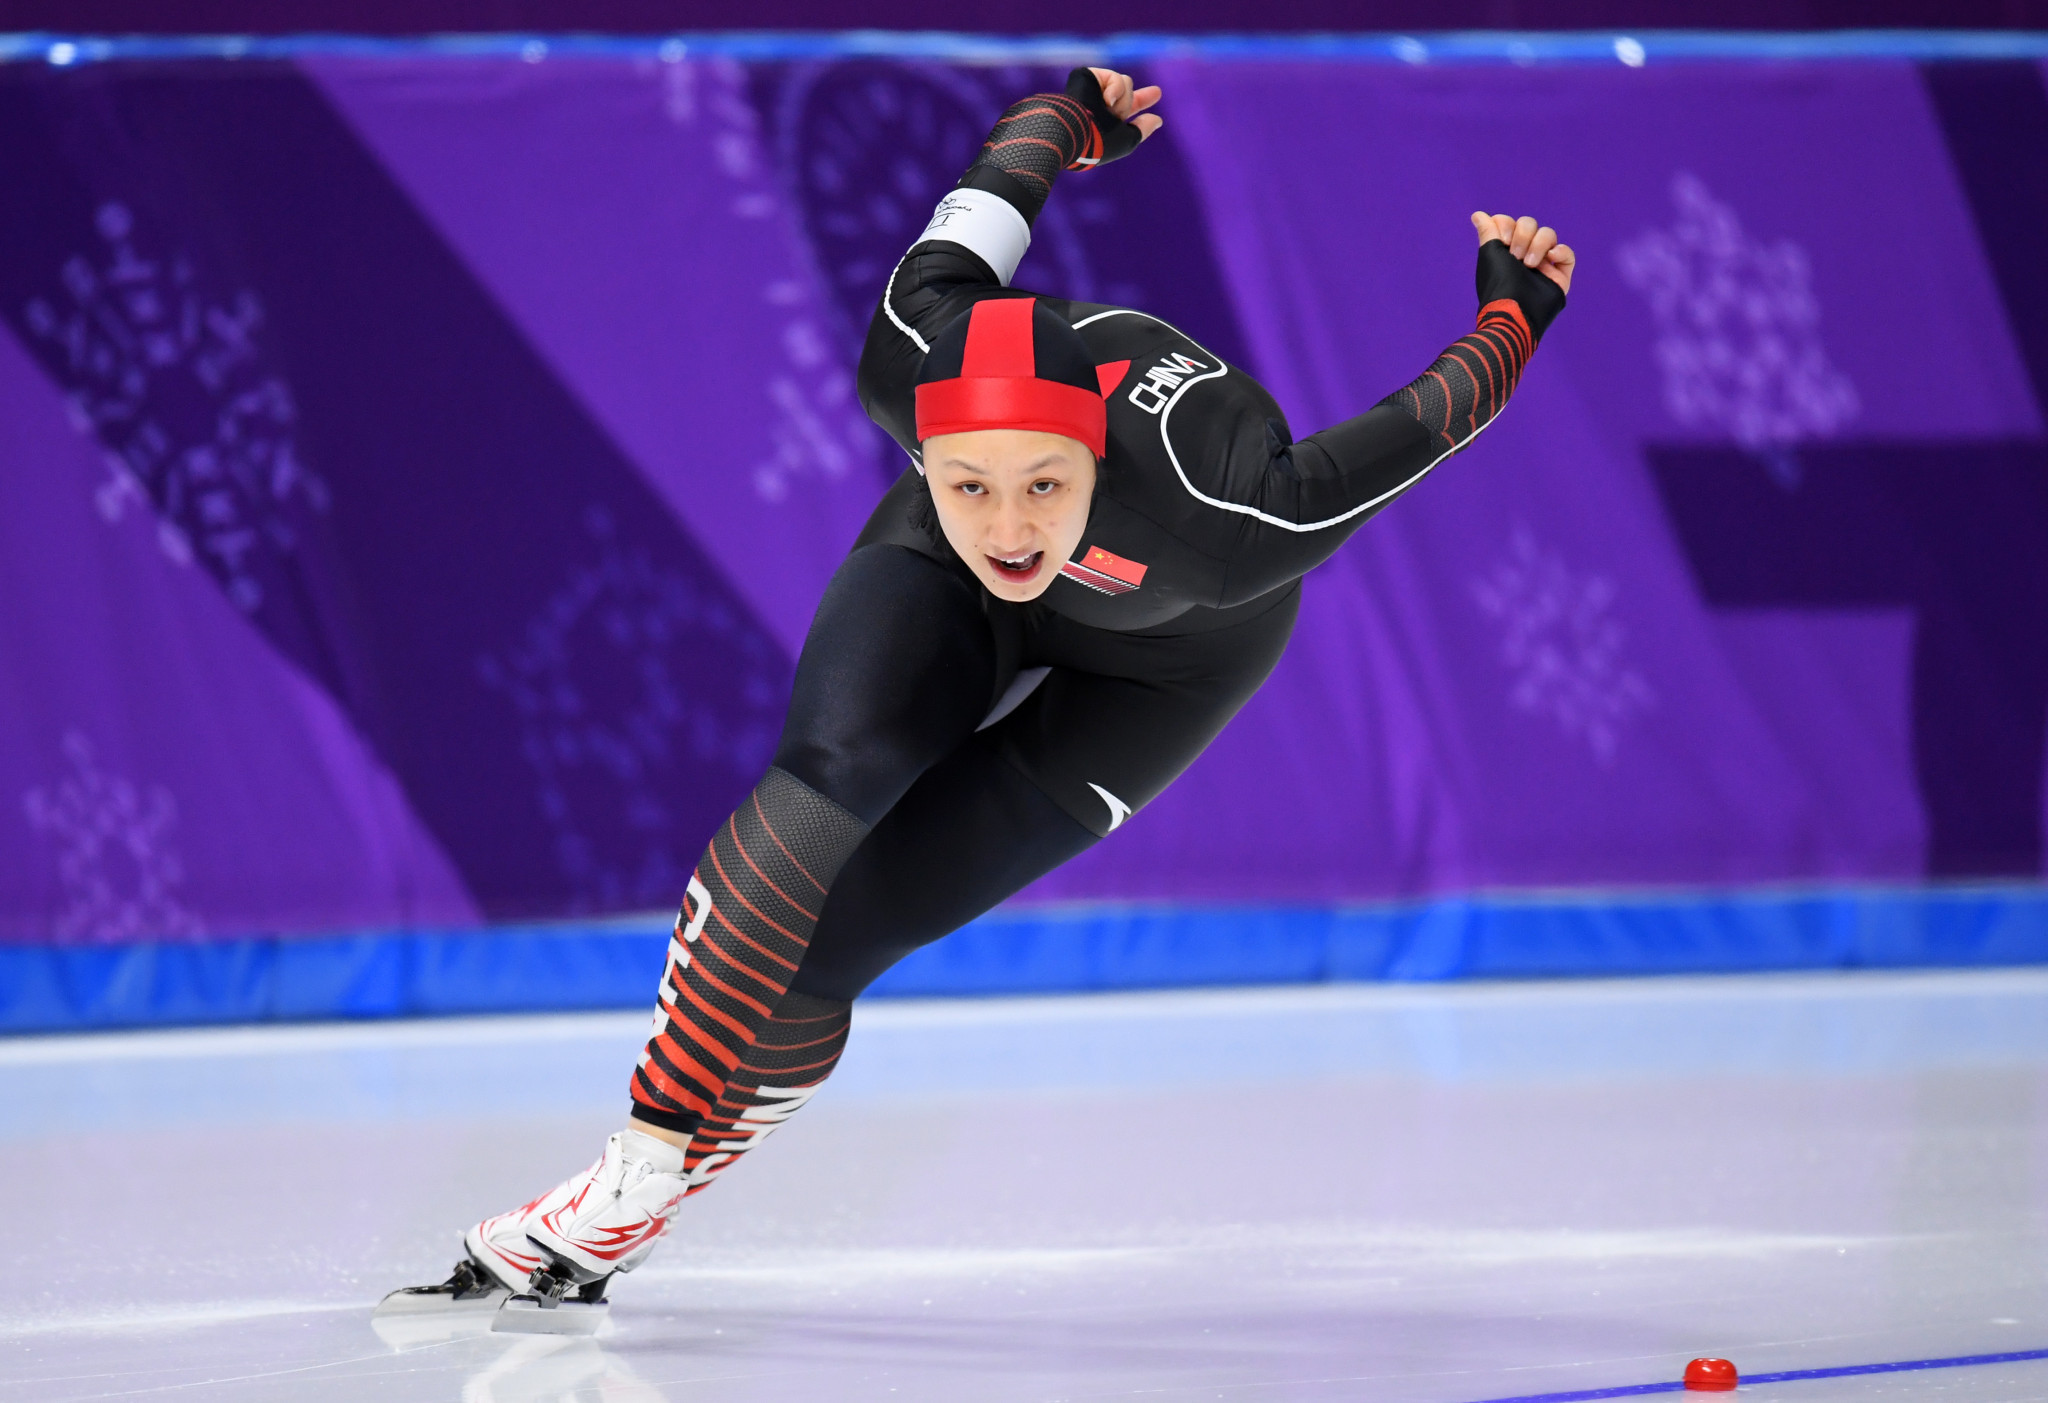 Olympic speed skating champion Zhang among those selected to WADA Athlete Council